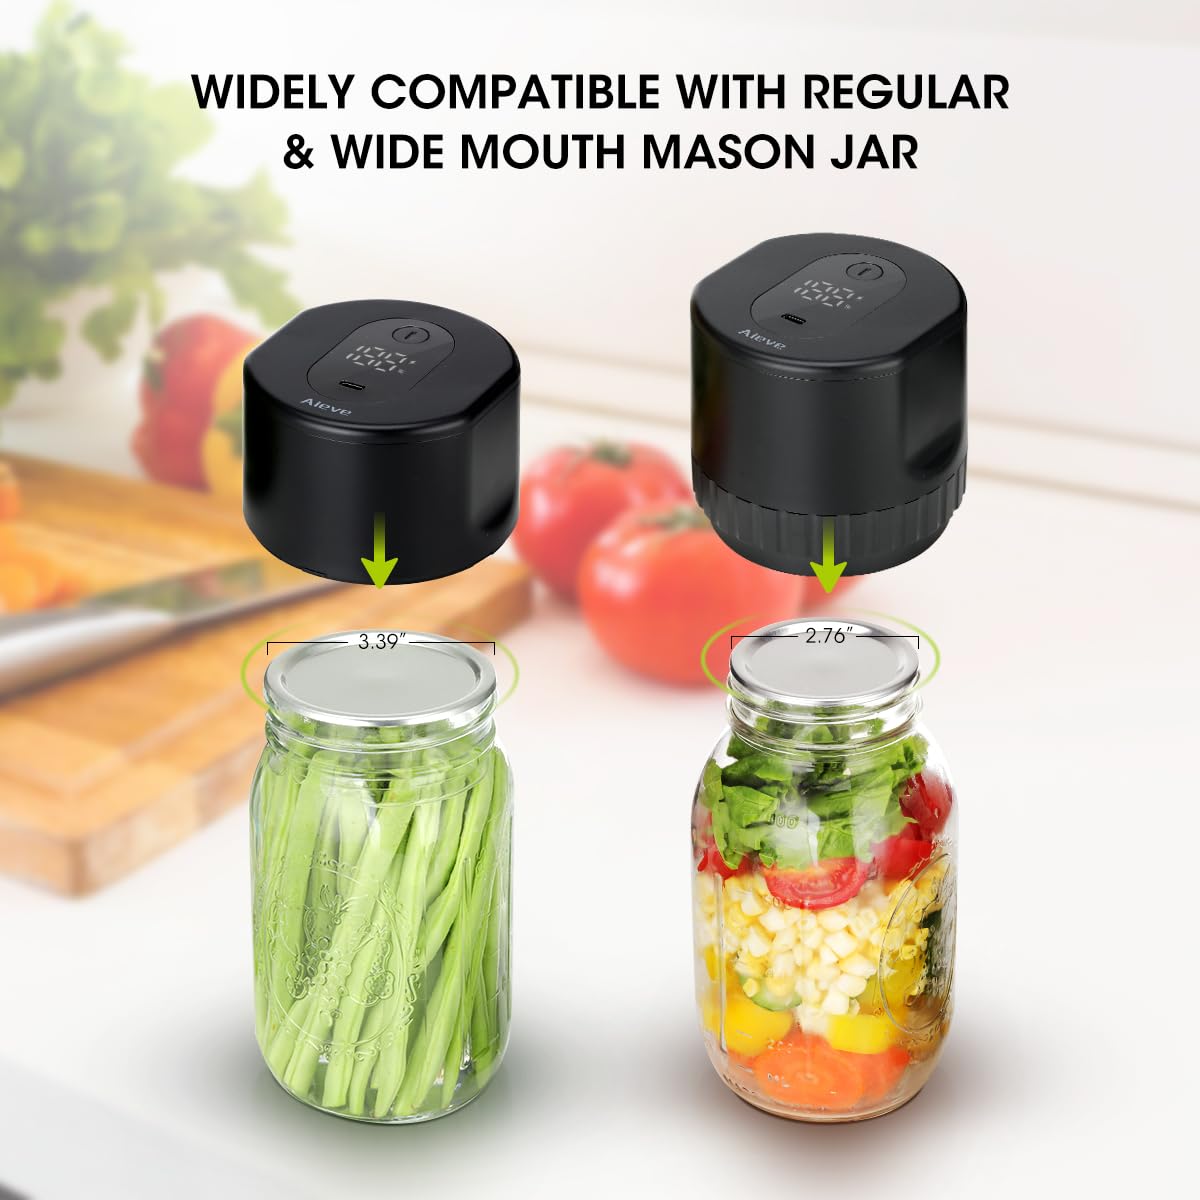 wideky compatible with regular & wide mouth mason jar